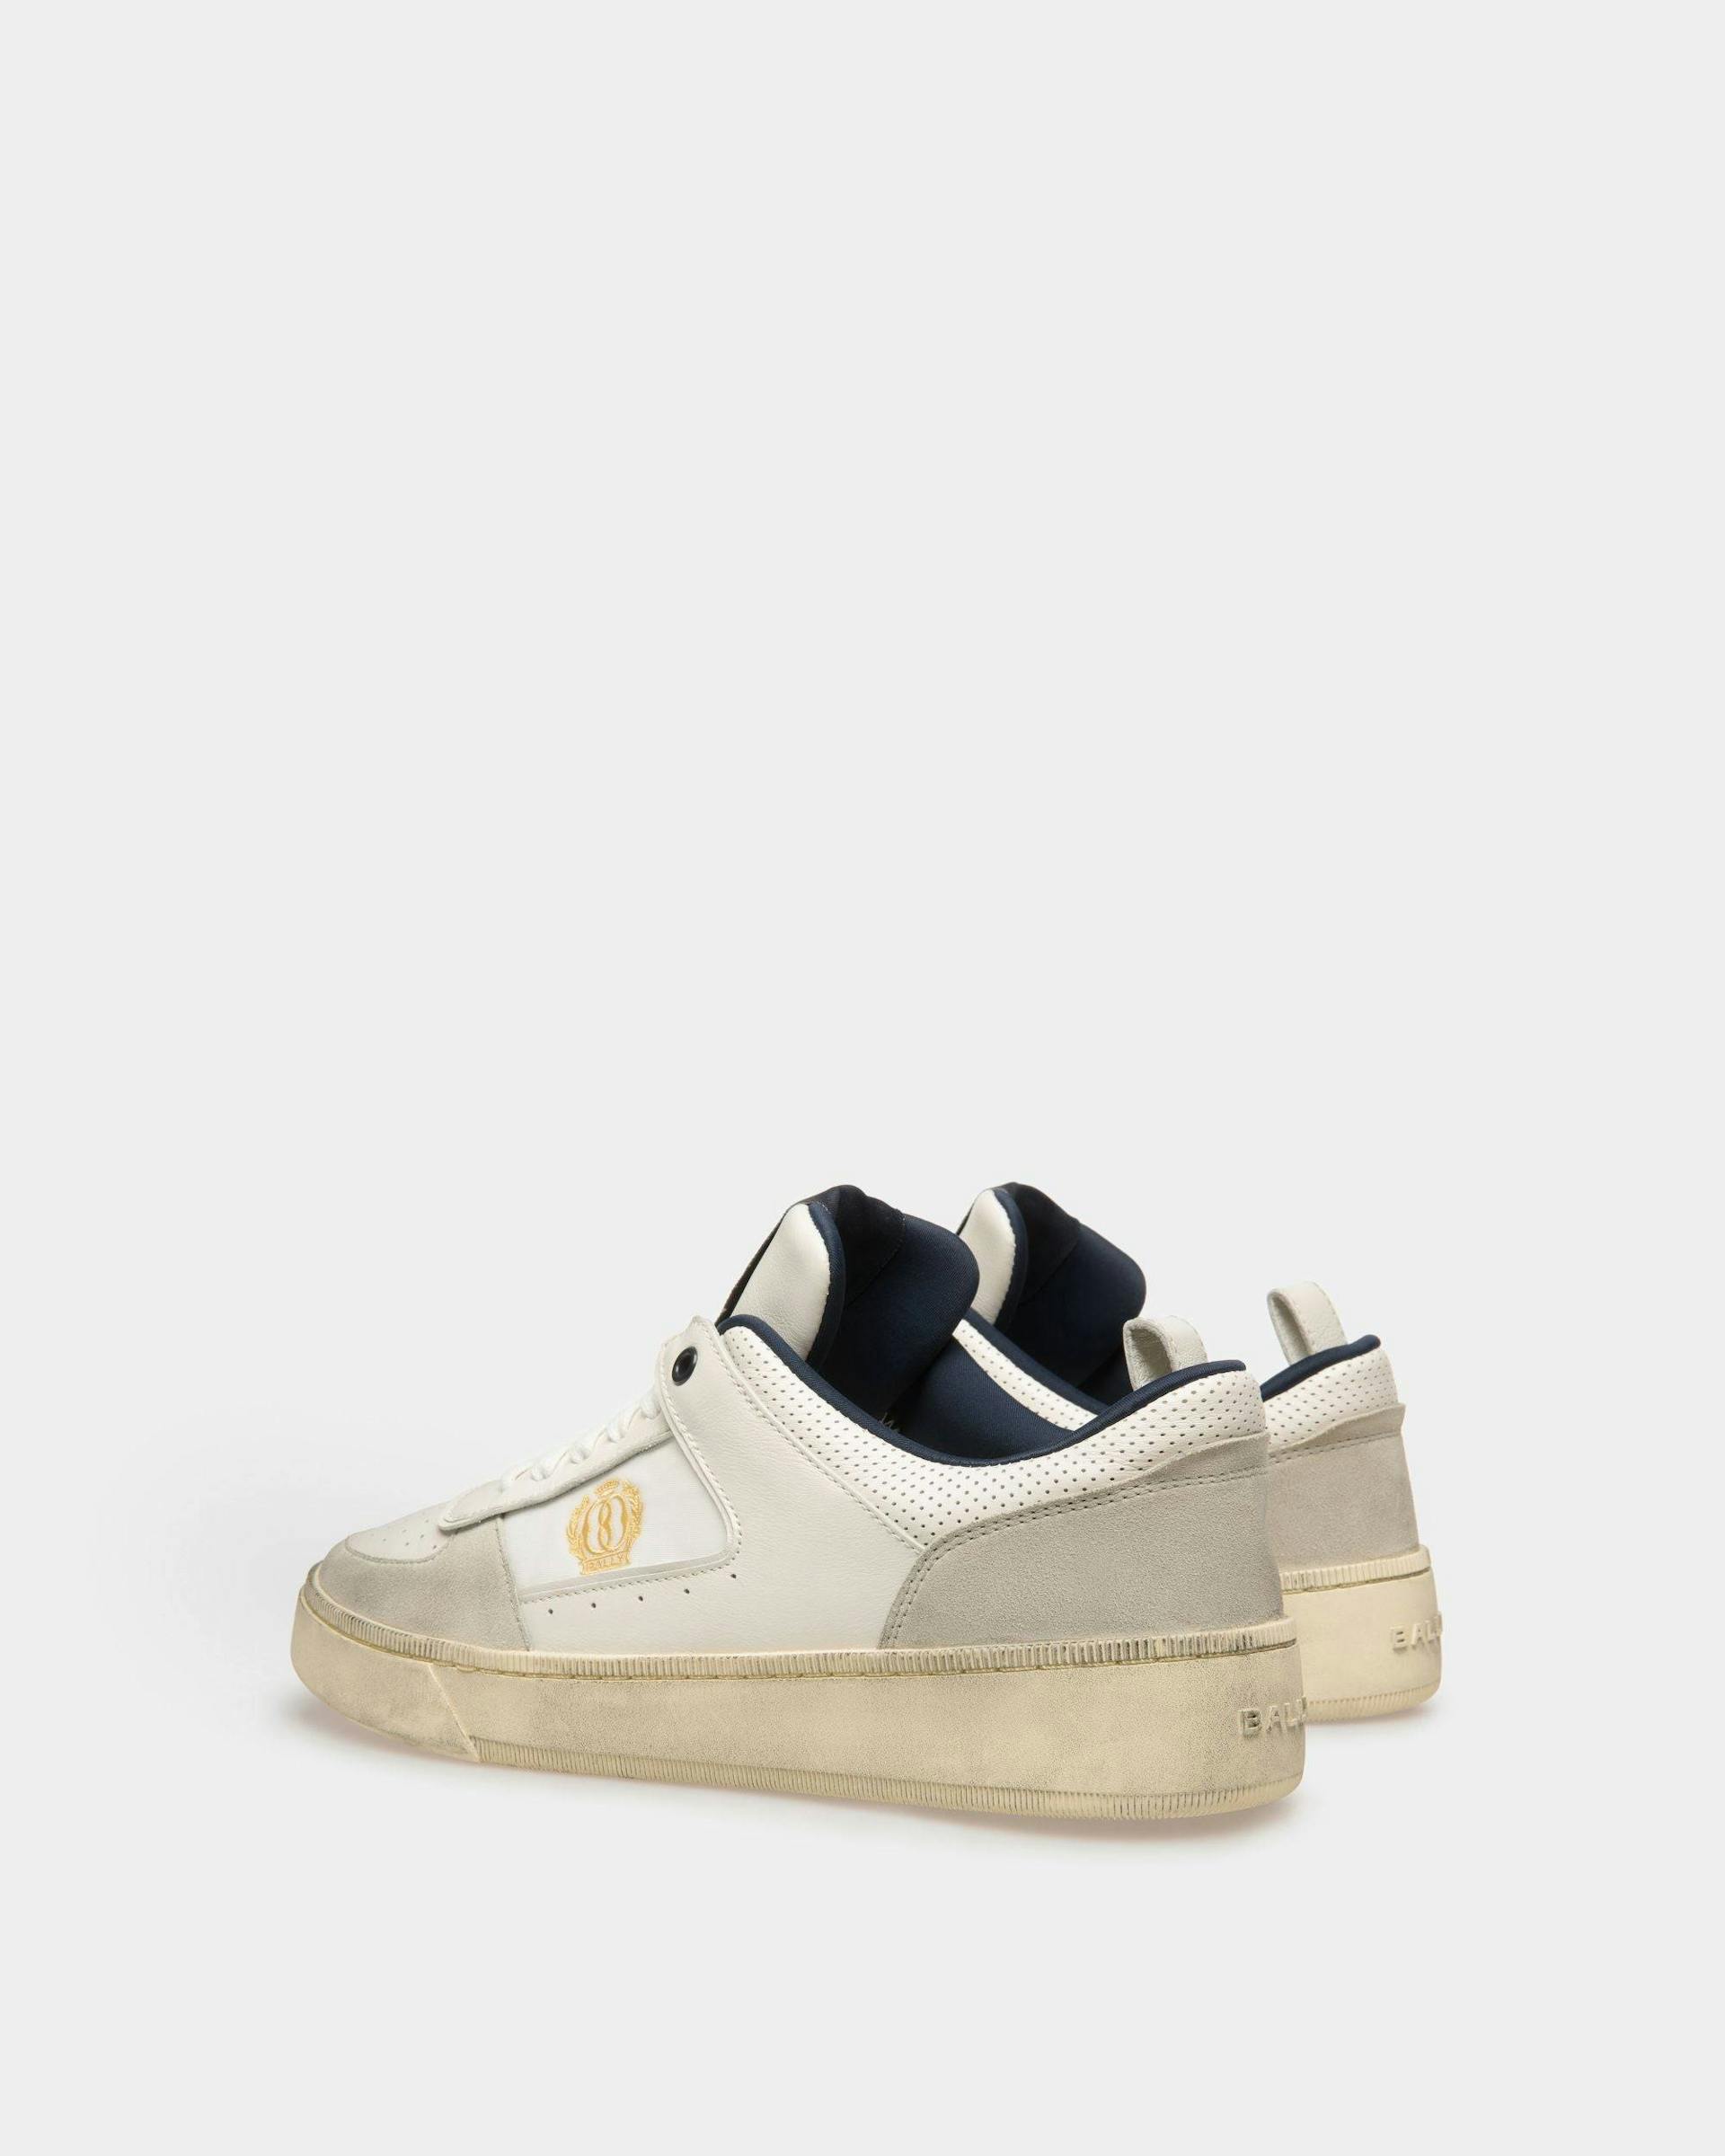 Men's Raise Sneakers In Dusty White And Midnight Leather And Fabric | Bally | Still Life 3/4 Back